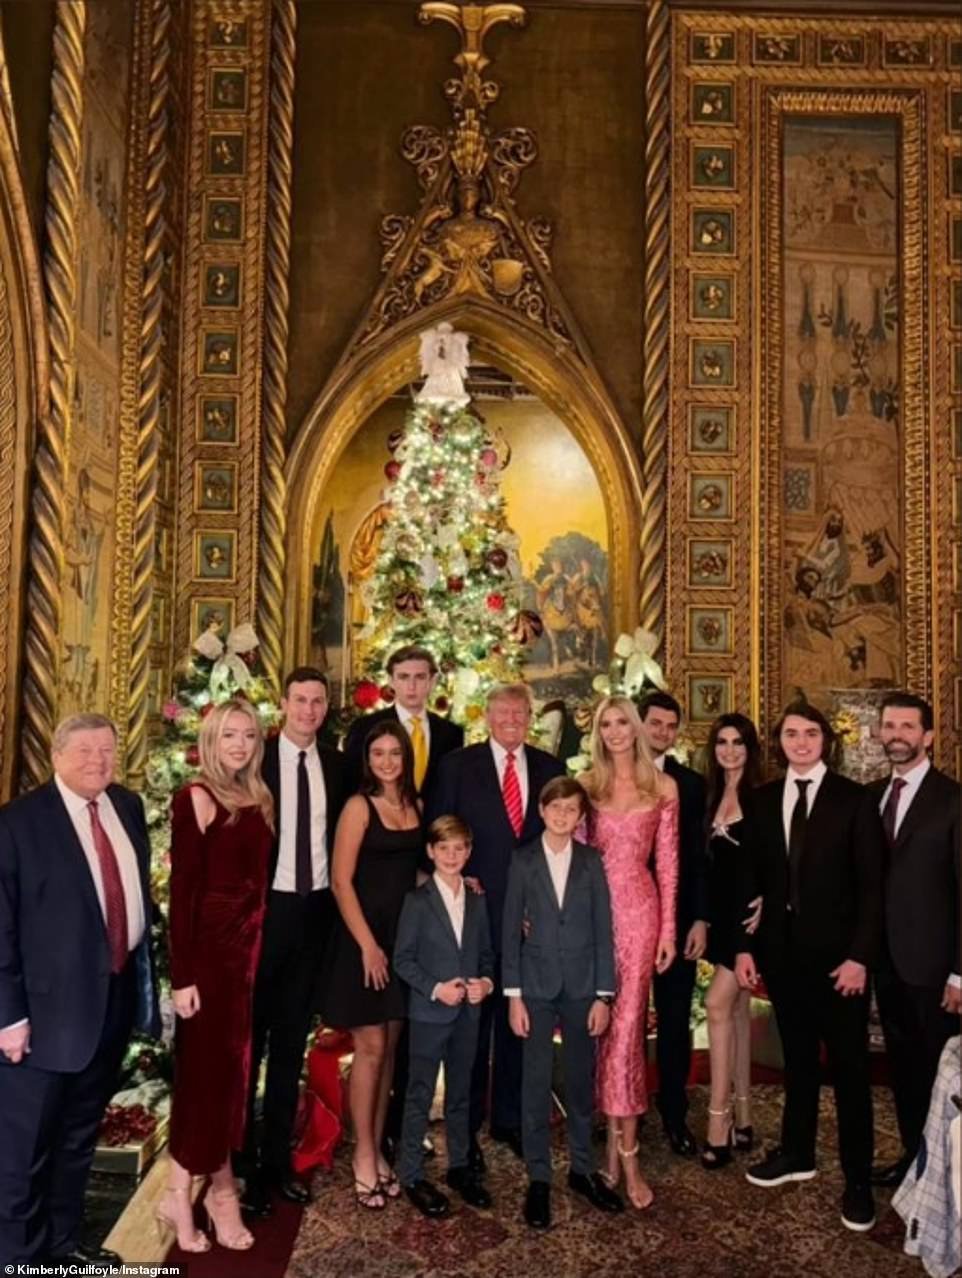 Trump's eldest daughter Ivanka and husband Jared, both once advisers to the ex-president, were in the family photo with their three children Arabella, 12, Joseph, 10, and Theodore, seven.  Guilfoyle, a former Fox News host who was married to Democrat Gavin Newsom, the governor of California when he was mayor of San Francisco, is engaged to Trump's eldest son Donald Trump Jr., who appeared in the Christmas image.  It is not clear whether Melania was at the meeting, but not in the photo.  In a rare public remarks appearance earlier this month, the former first lady welcomed 25 new citizens to America during a naturalization ceremony at the National Archives on December 15.